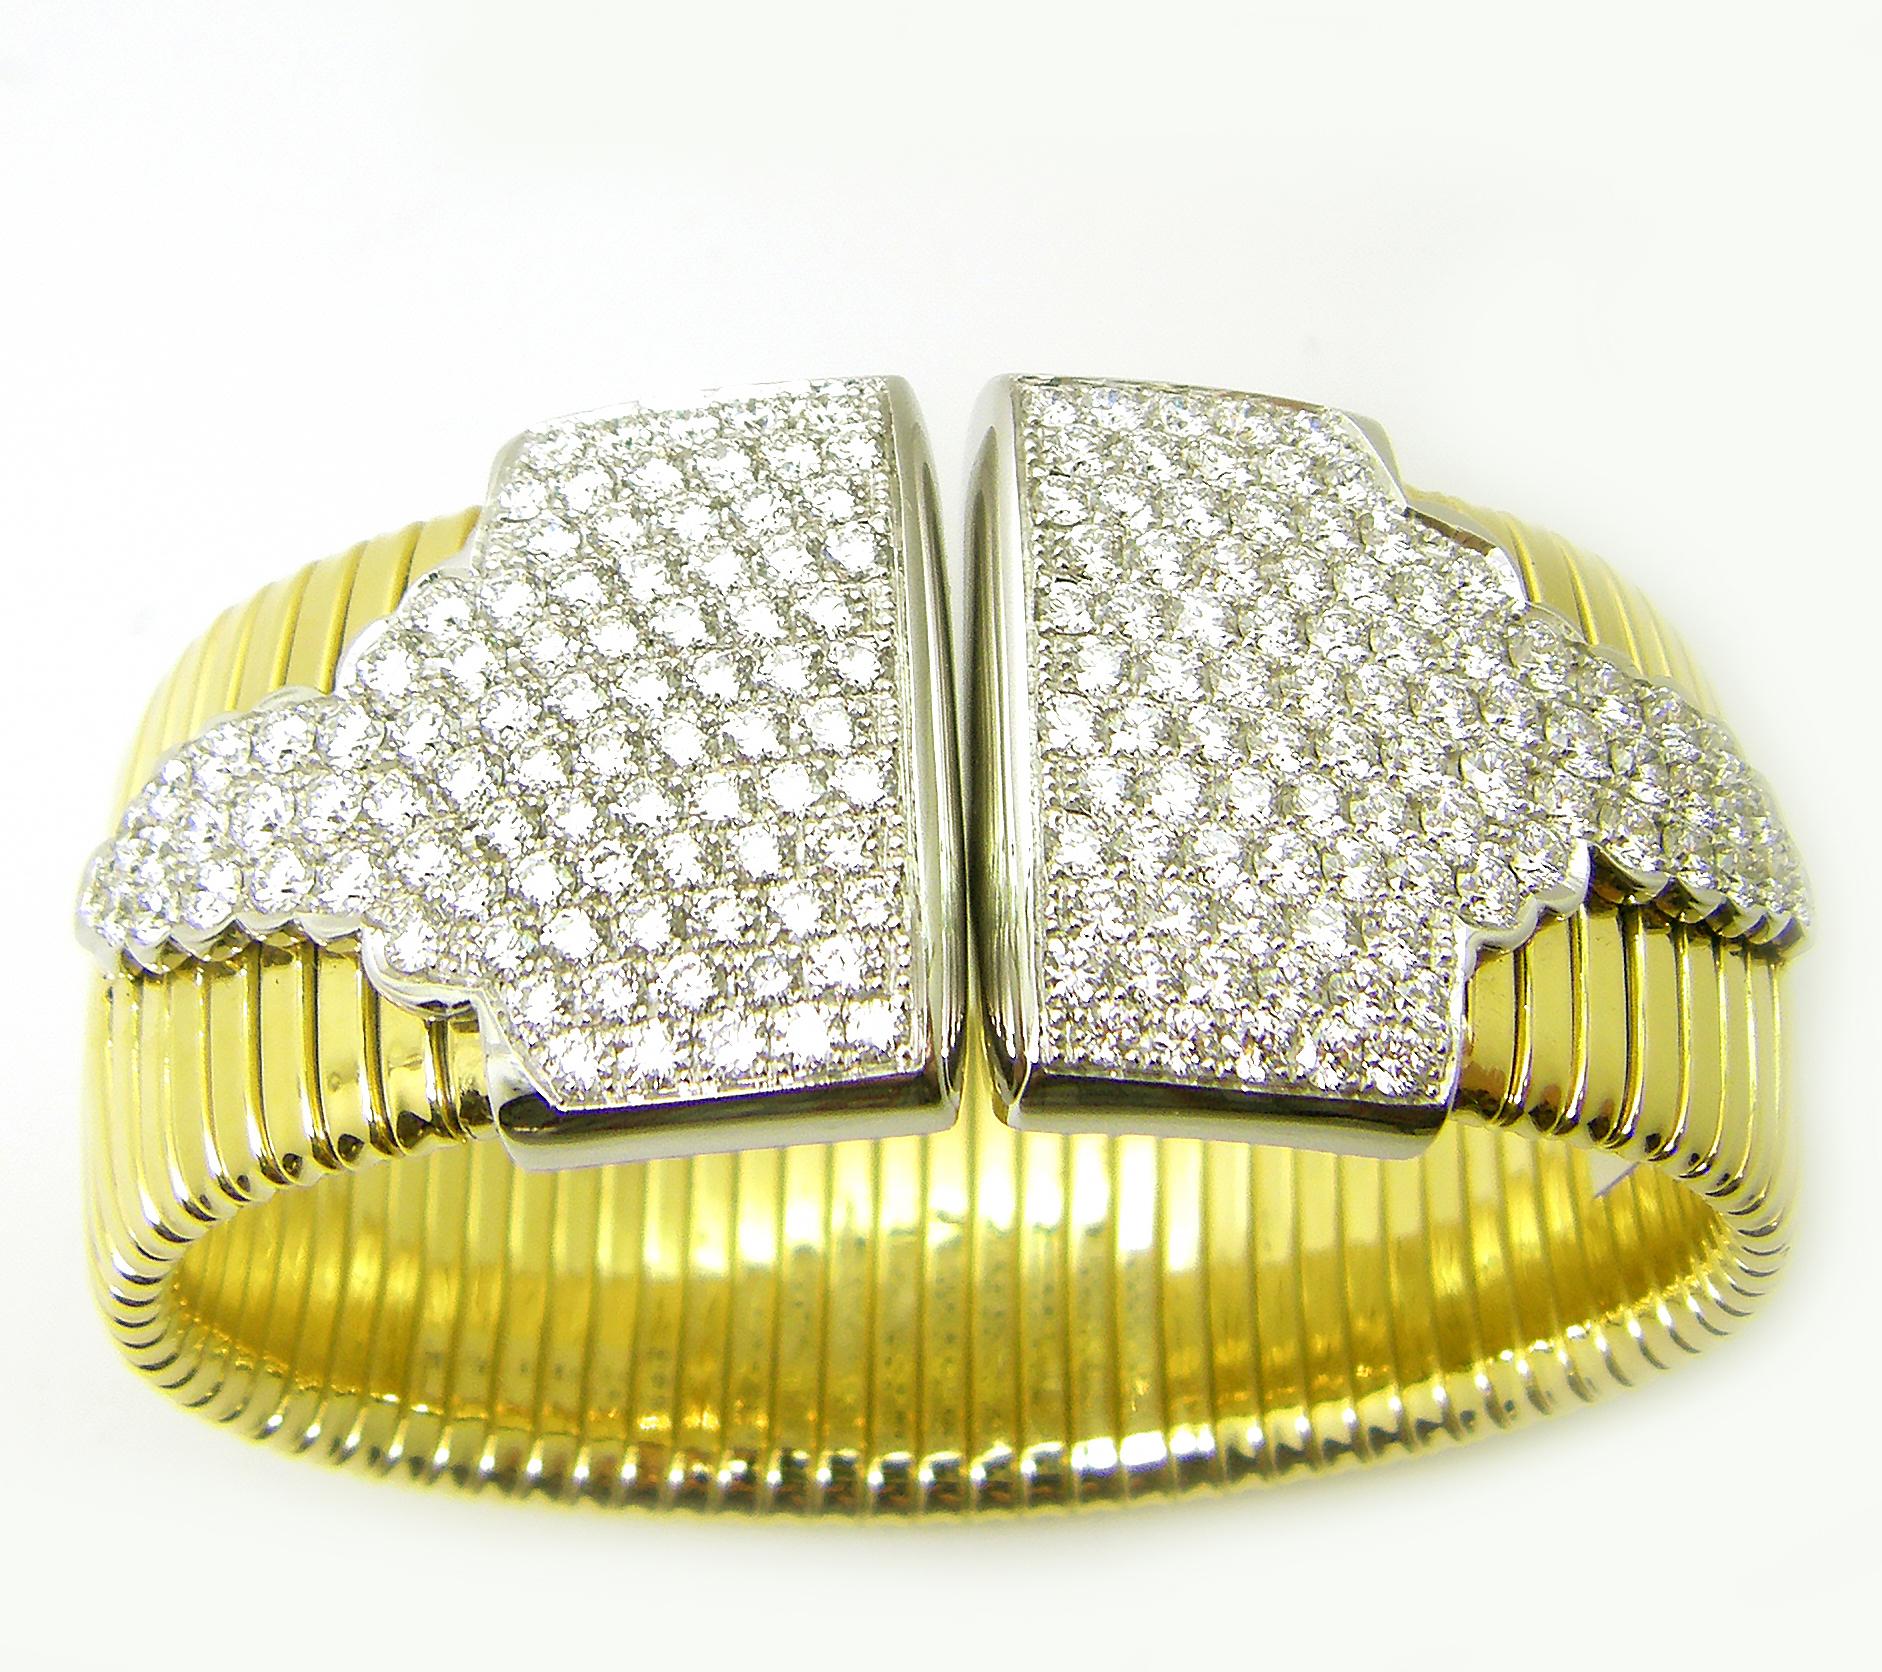 S.Georgios designer two-tone flexible wide bangle bracelet in solid yellow and white gold 18 karats and is made by links connected together to give it the ability to stretch and feel unbelievably comfortable. This gorgeous cuff bracelet is custom